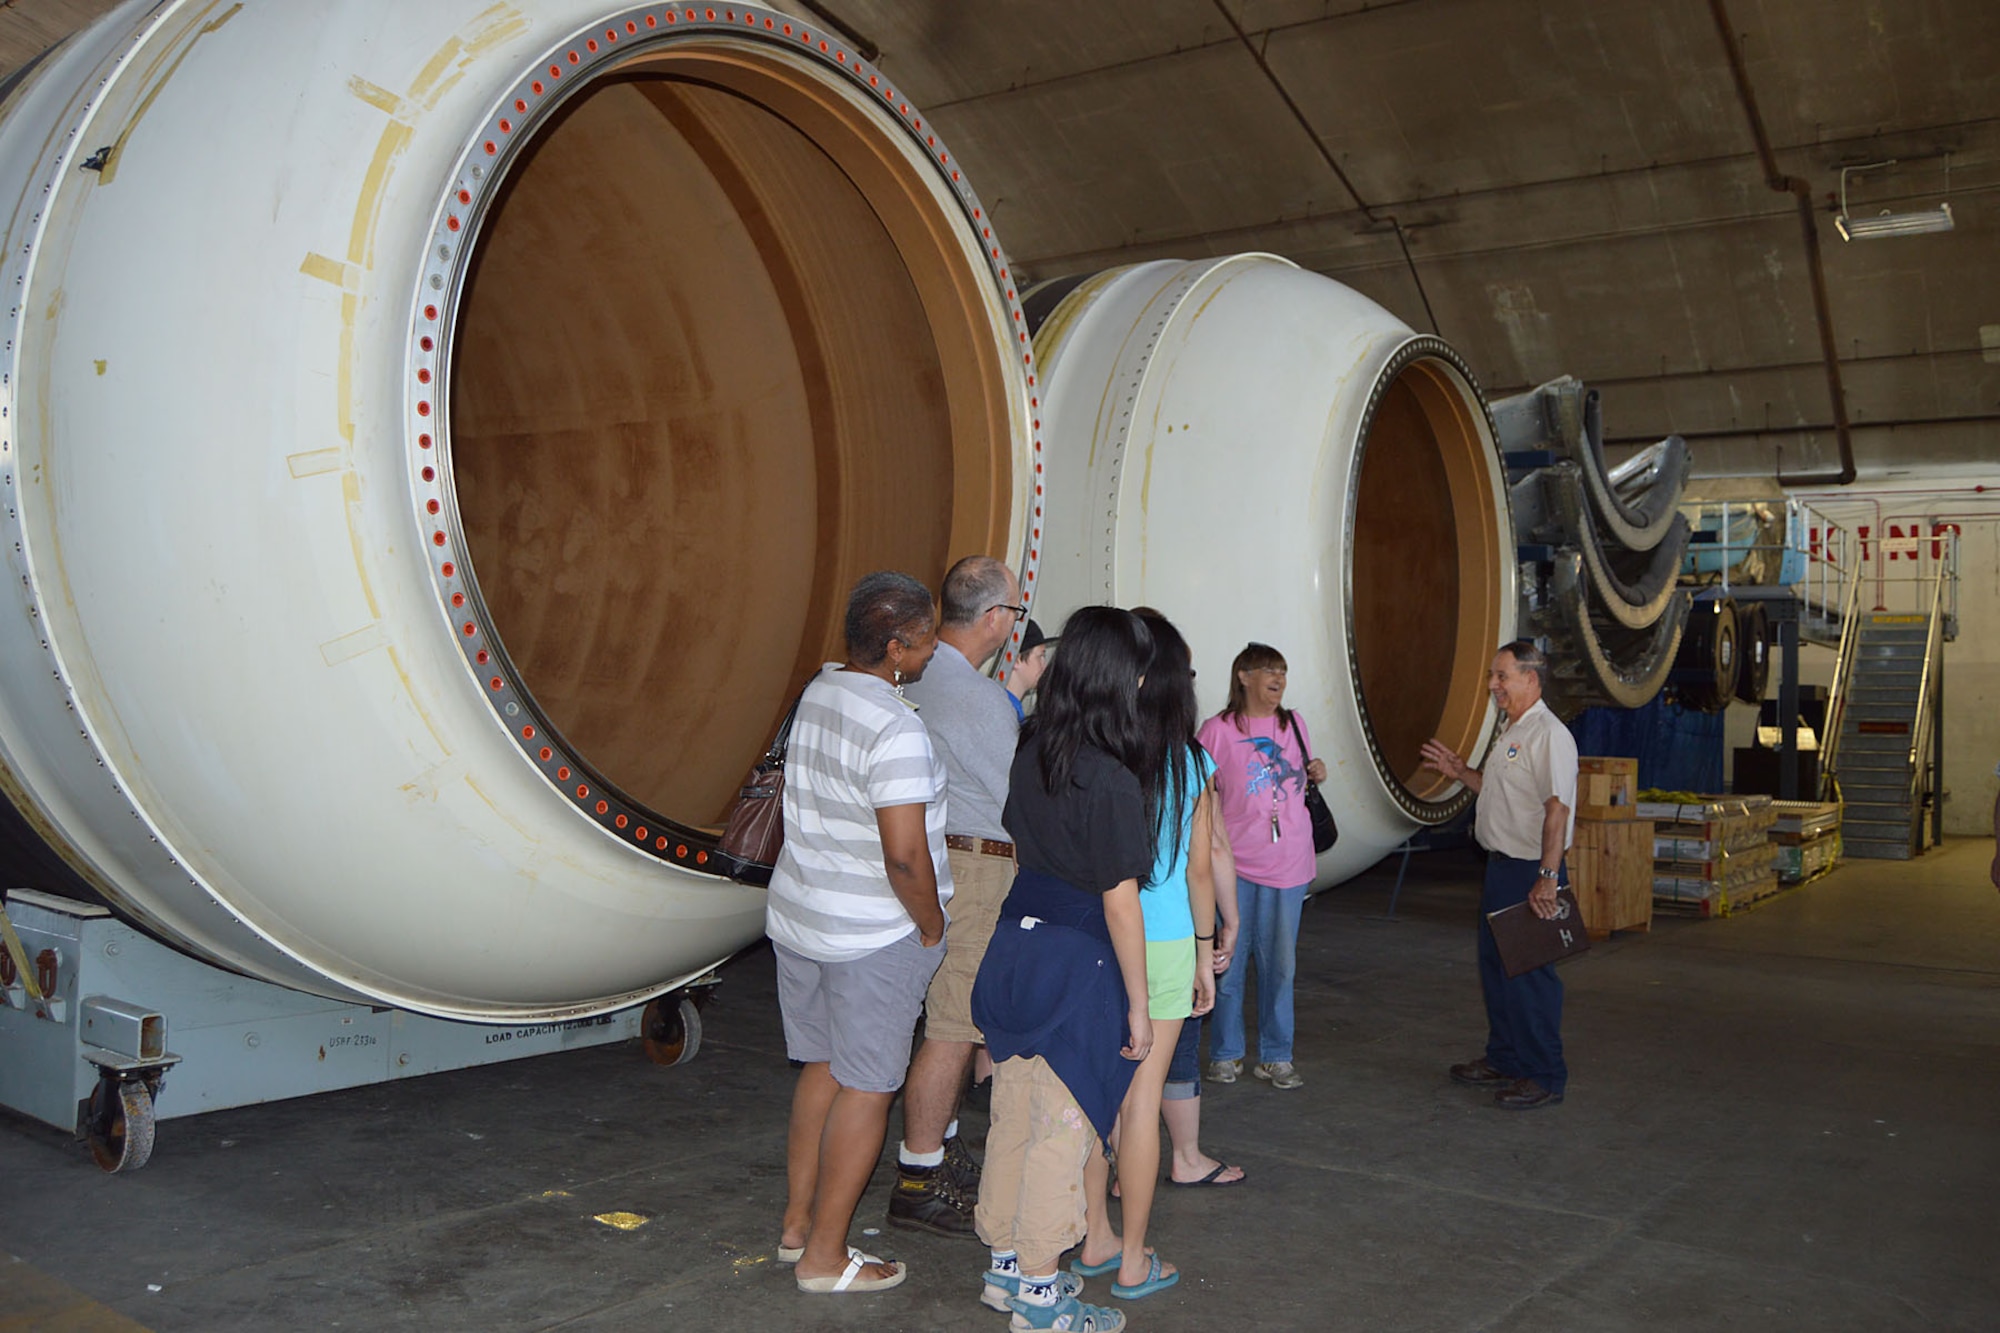 DAYTON, Ohio -- Visitors are able to see the Titan IVB during the Behind the Scenes Tours of the museum's restoration hangars. (U.S. Air Force photo by Ken LaRock)